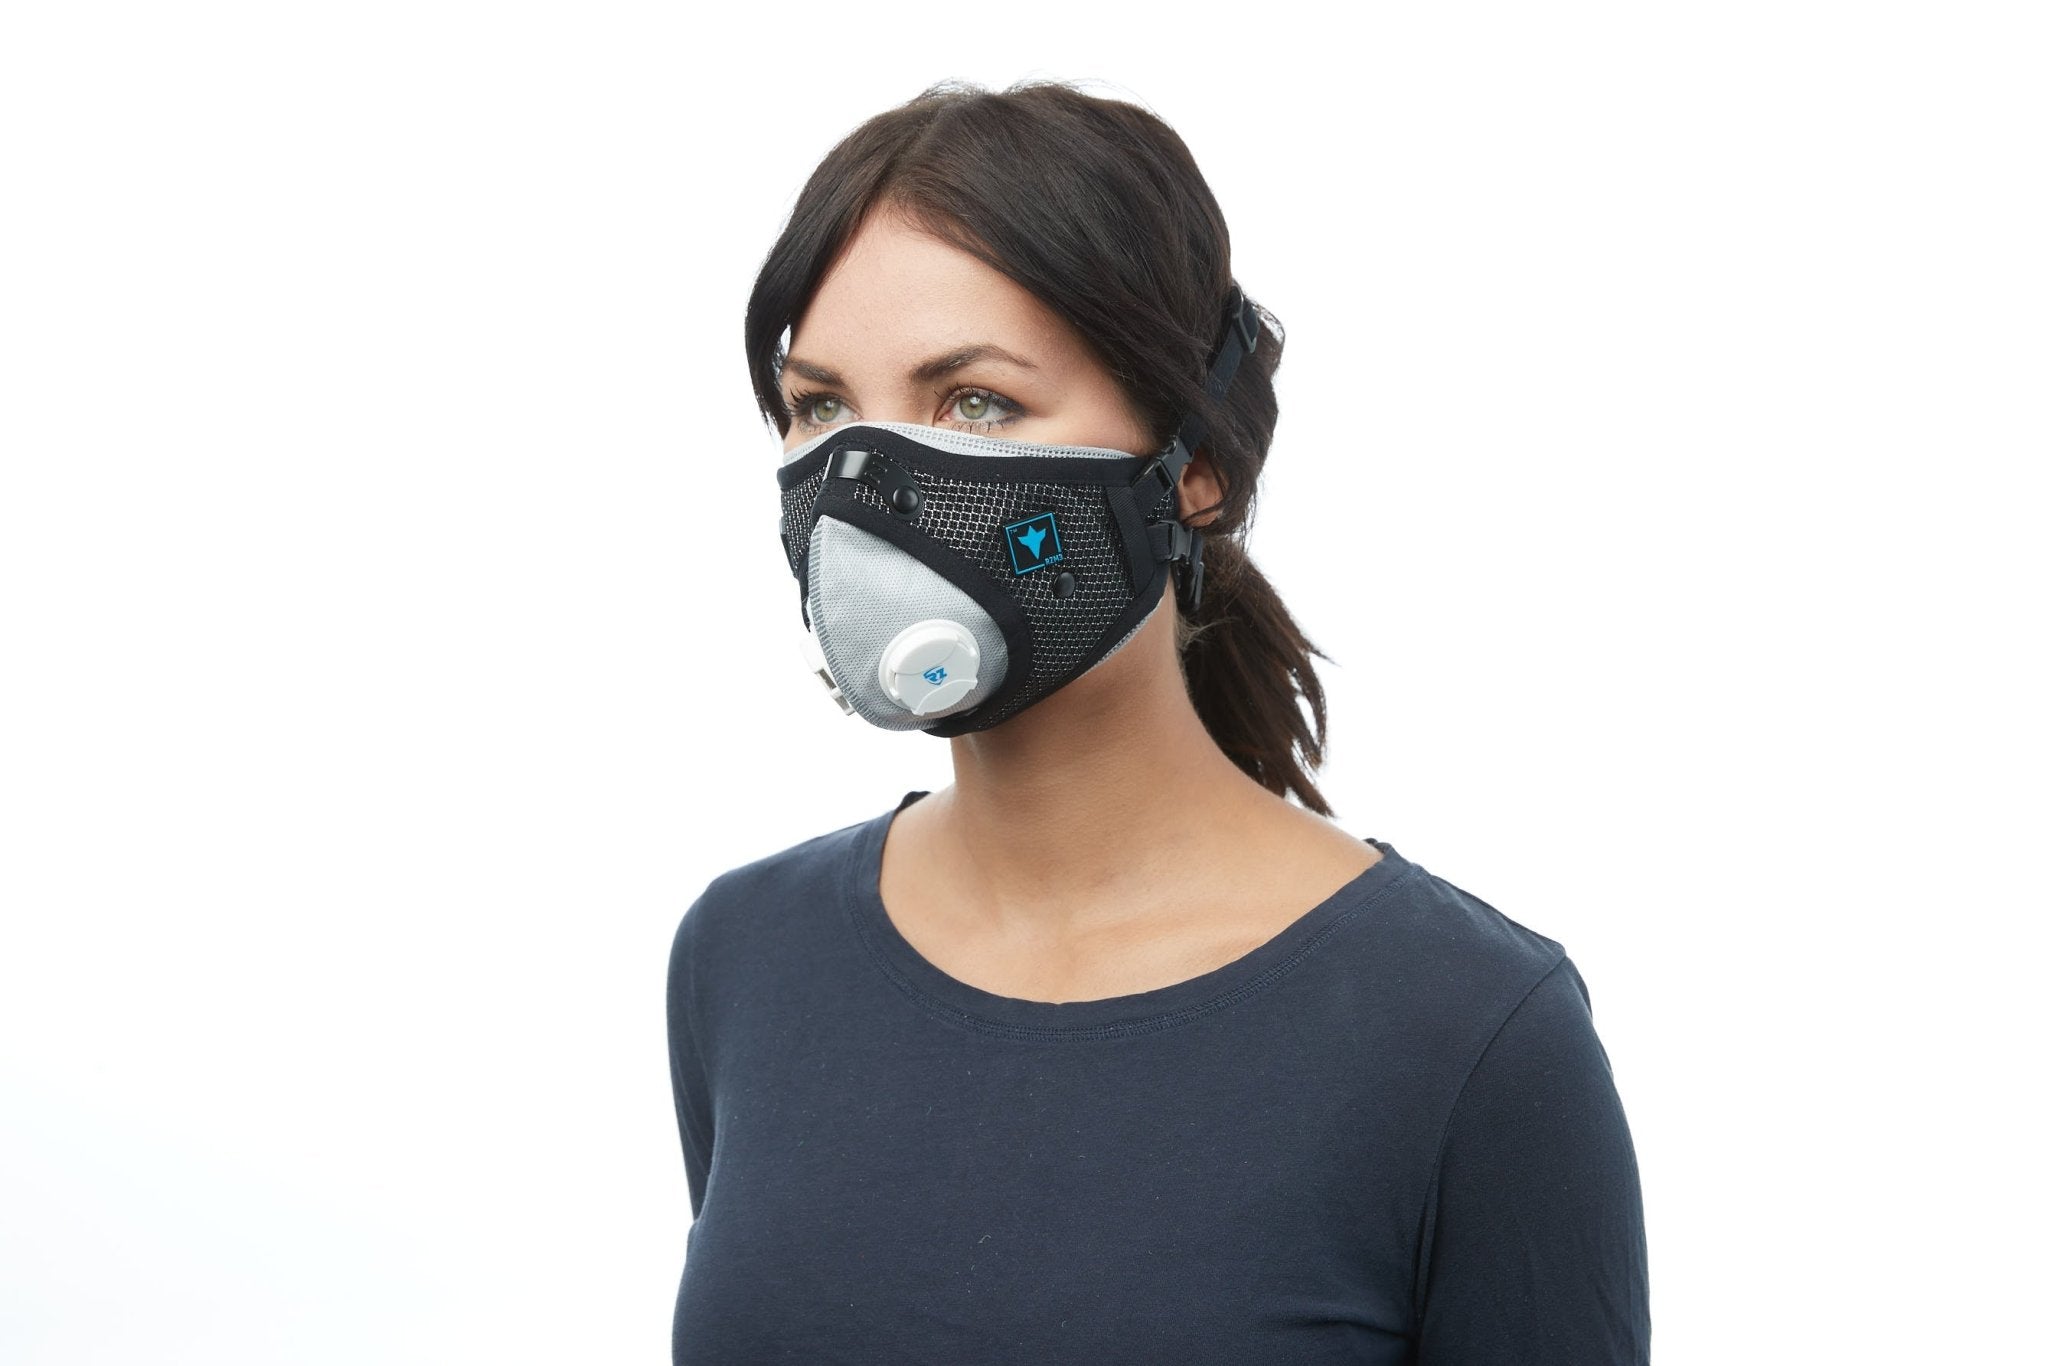 RZ Mask and Furniture Flipping - The New RZ M3 Mask - RZ Mask